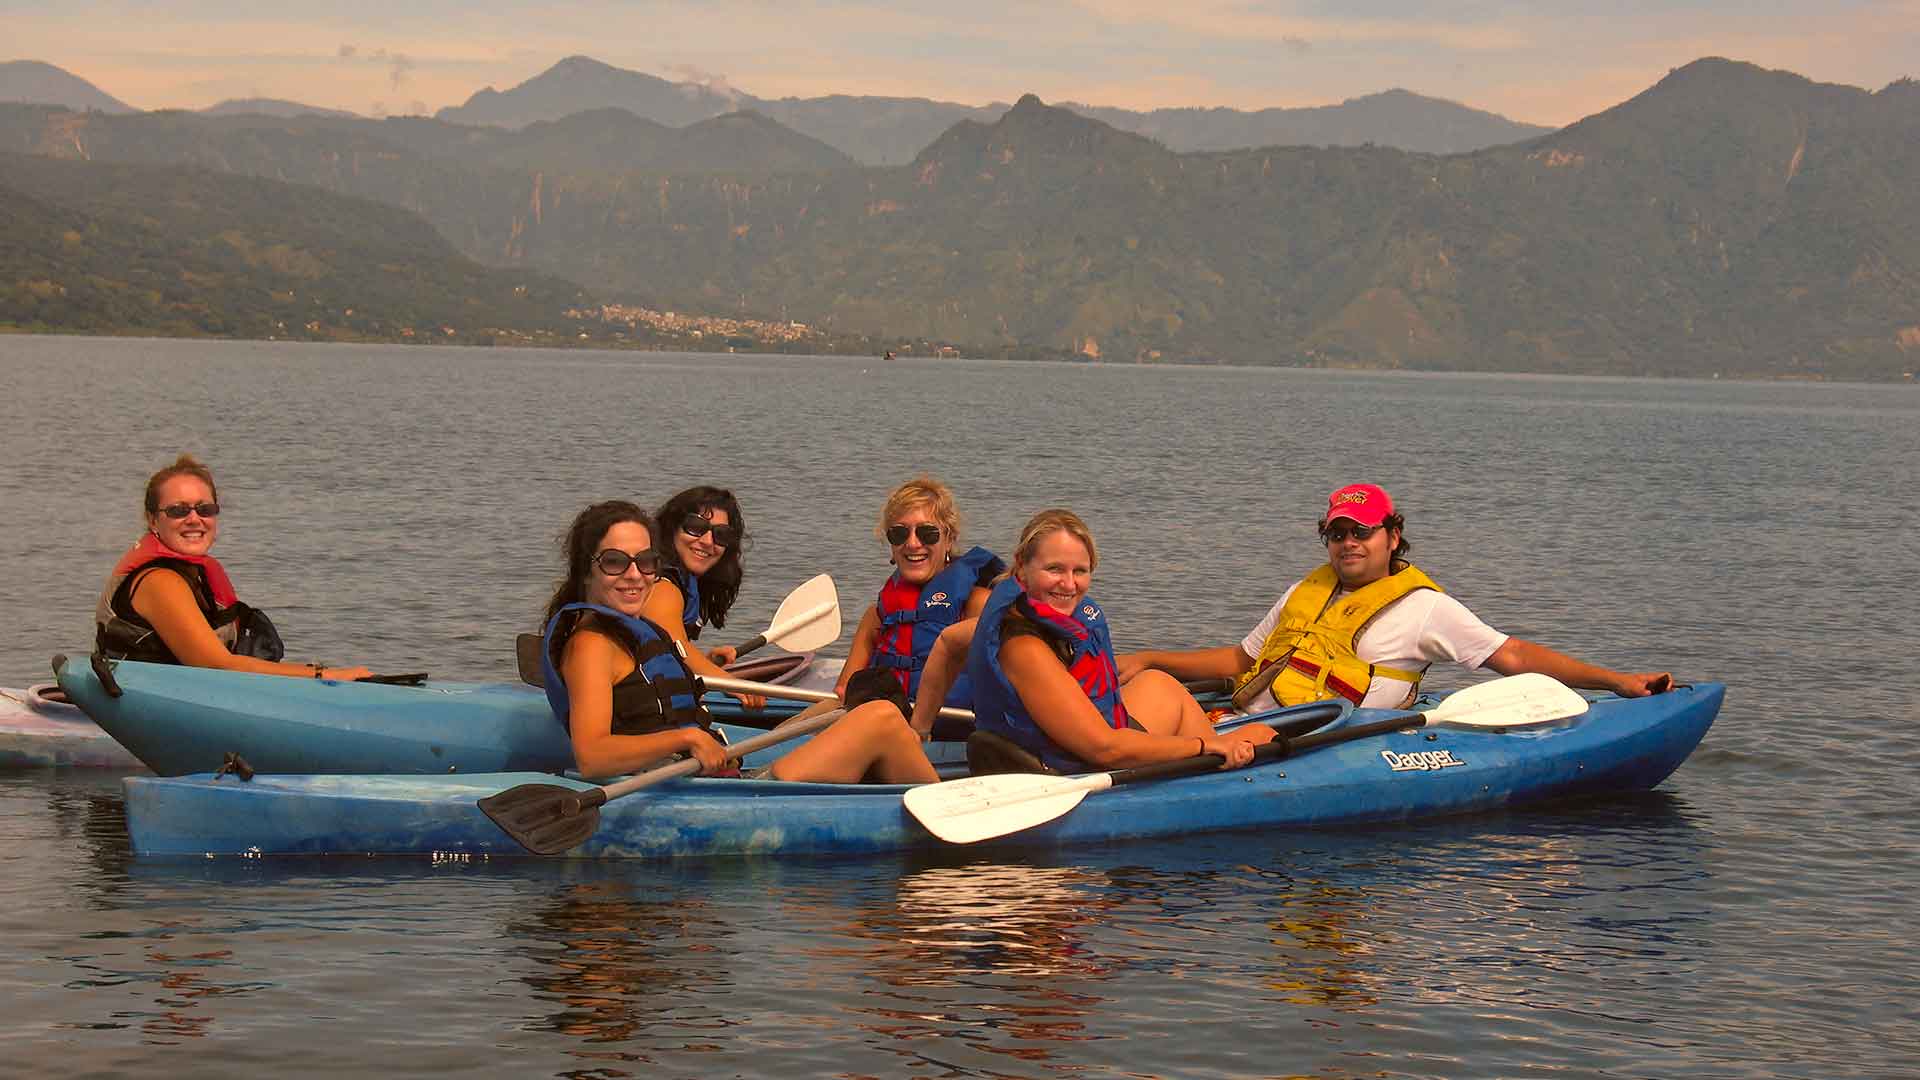 A group of women and a young man kayaking on the serene waters of Lake Atitlán, showcasing the safe and enjoyable travel experiences available in Guatemala.